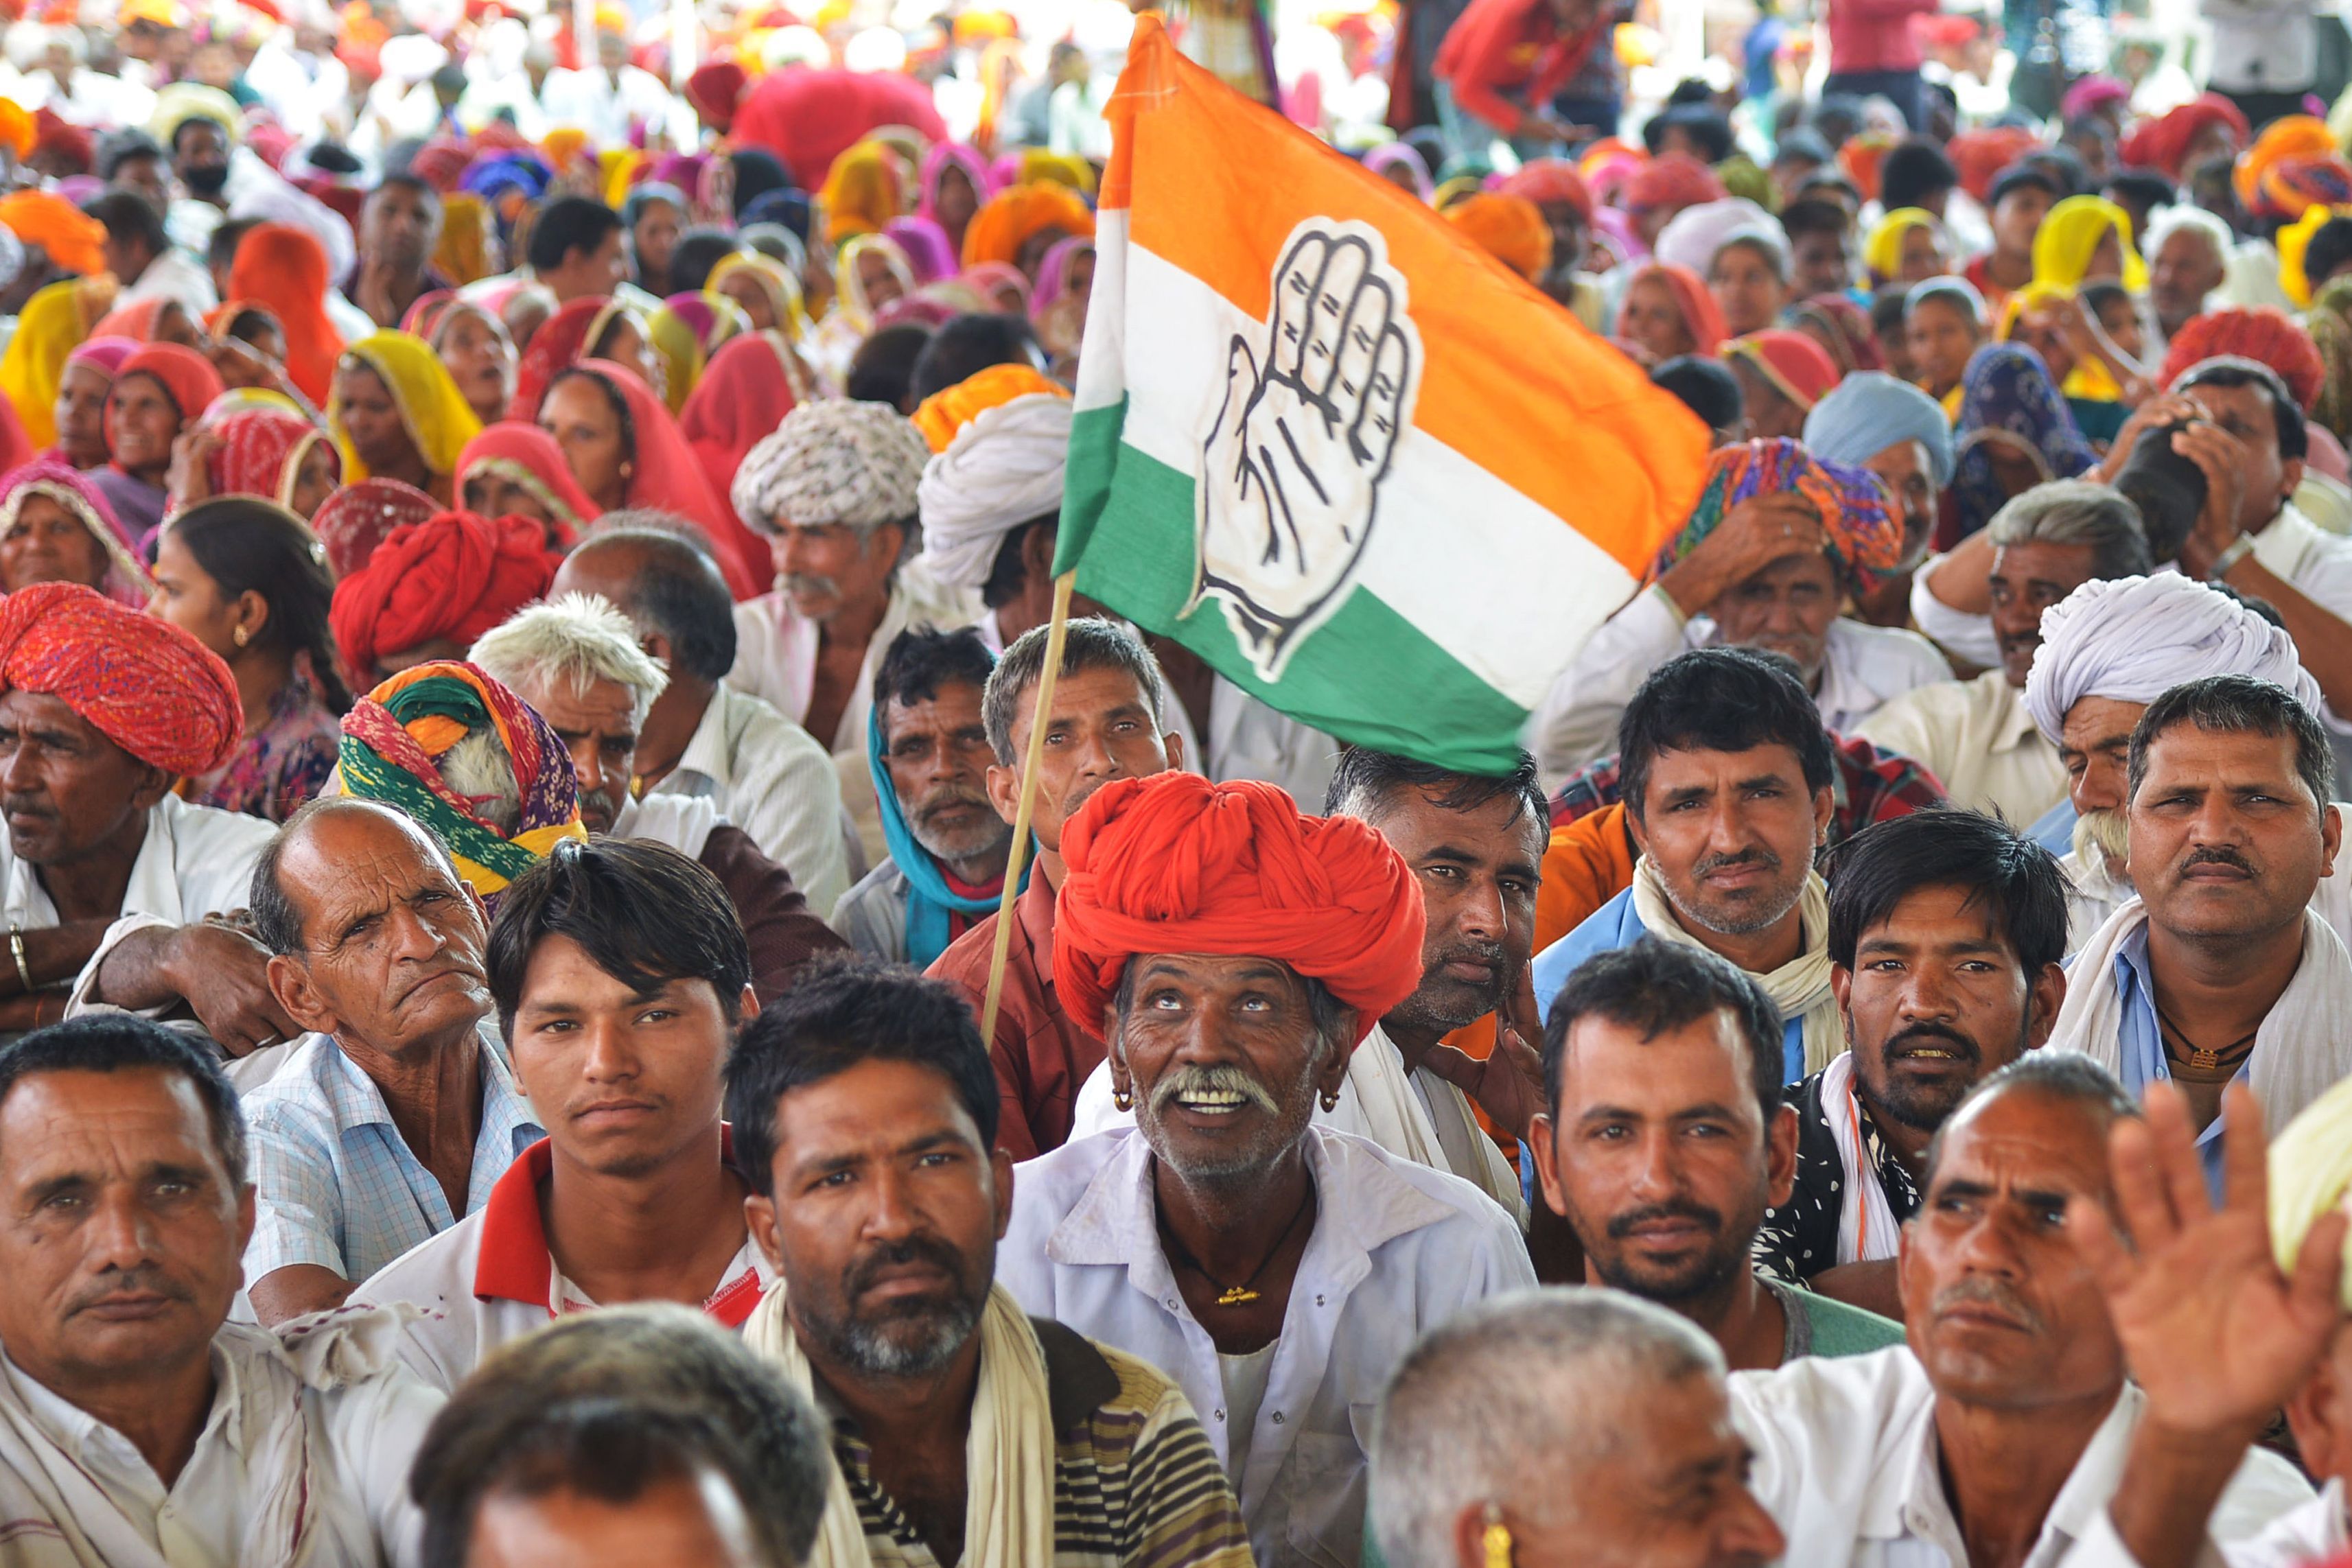 An Indian National Congress party supporter looks up to a Congress party flag during an election rally in Bandanwara, in the Indian state of Rajasthan on April 25, 2019.